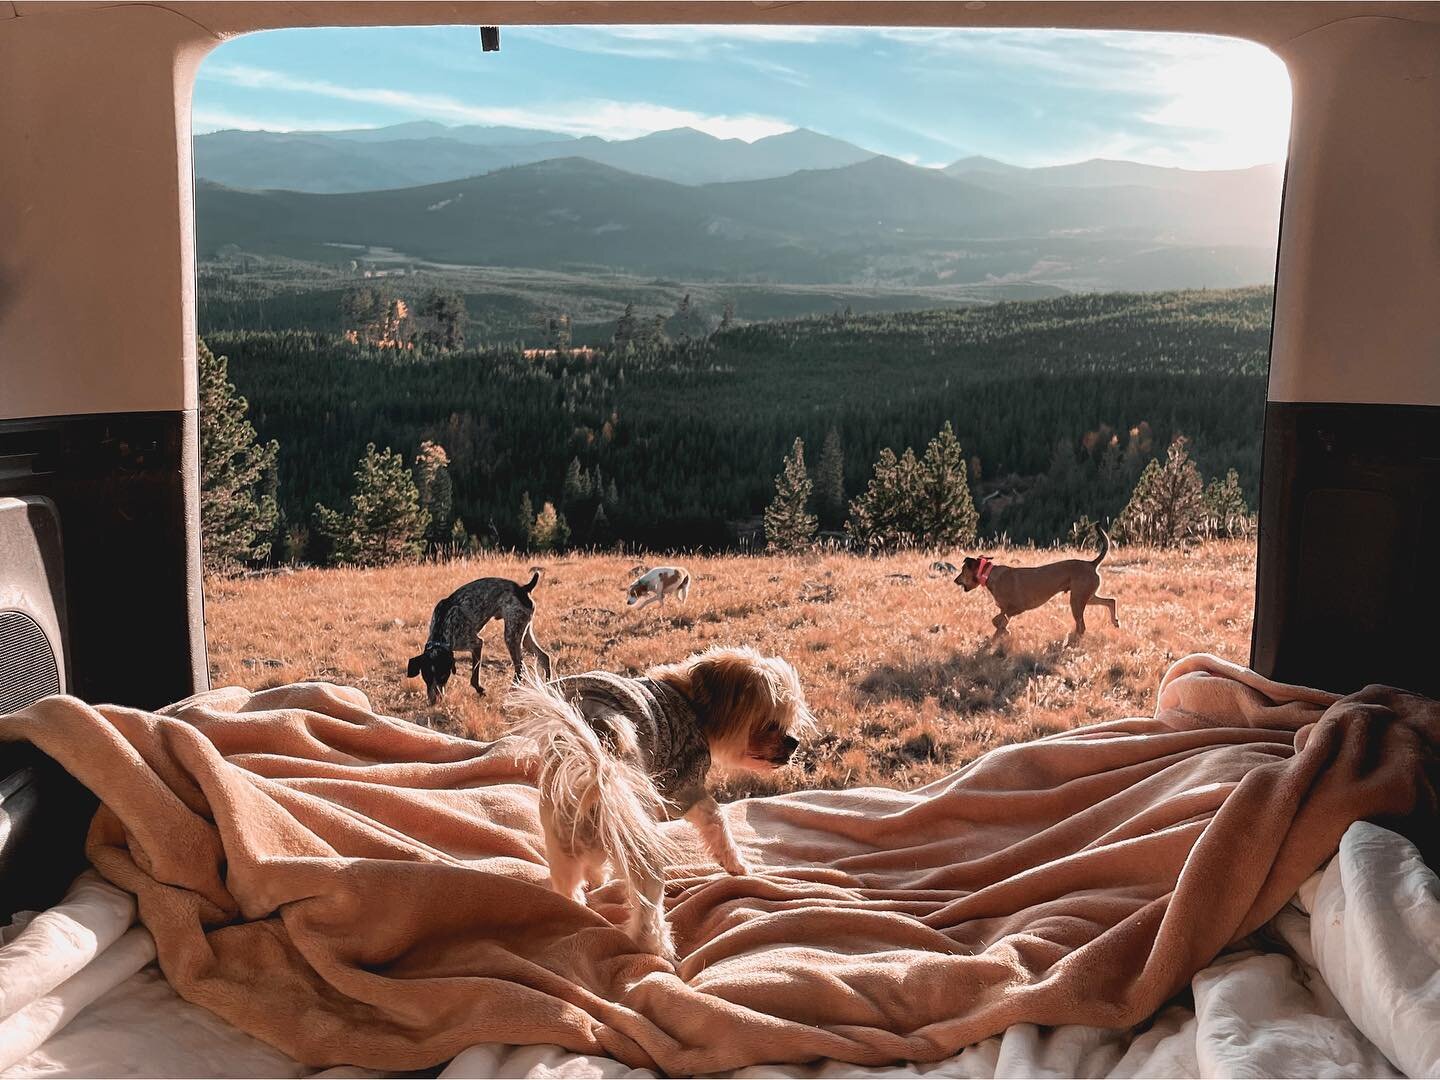 last chance to enter to win an adventure dog + camping gear giveaway loaded with gear for you and your pup! 😍

this sweet package includes:
@hestoutdoors Dog Bed + Pillow ($350 value) 
@gunnerkennels G1 Kennel ($700 Value) 
@moon_fabrications Awning